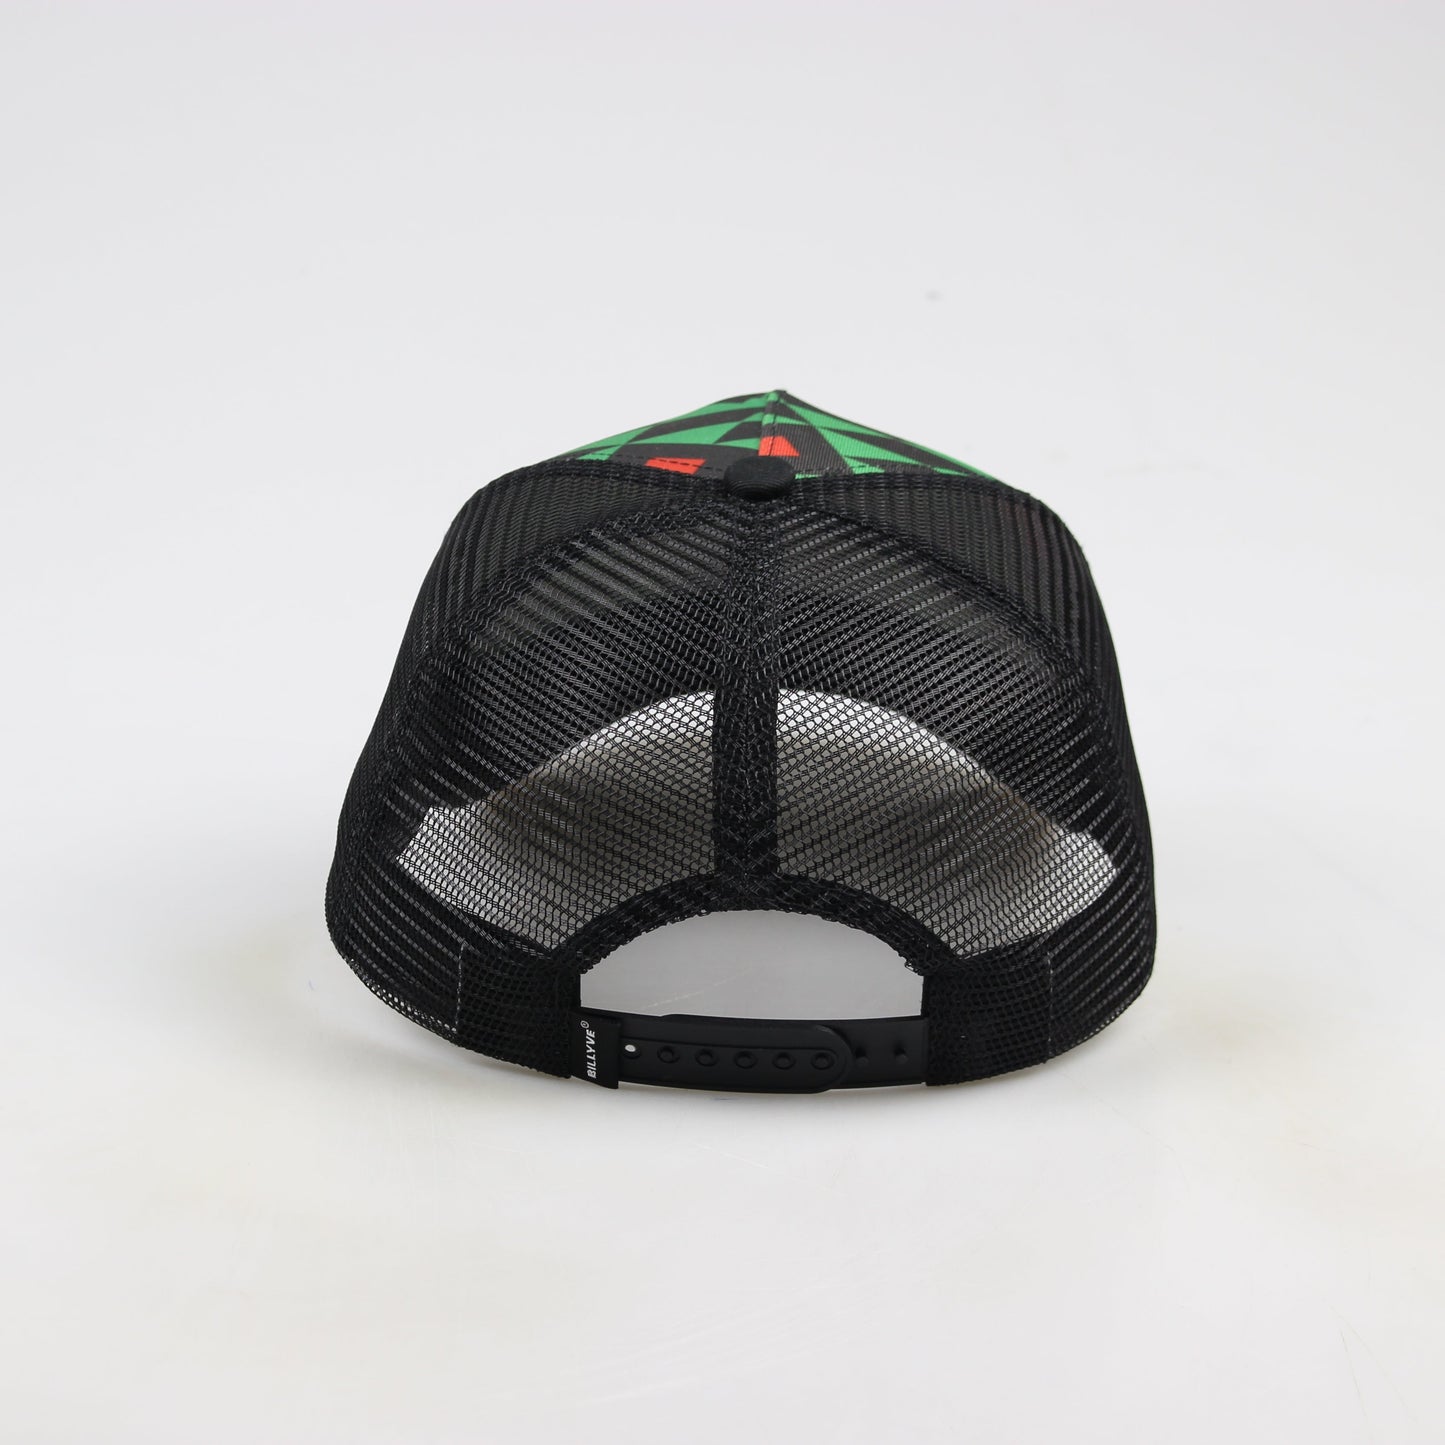 The Undefeated Palestine Trucker Cap by Billyve